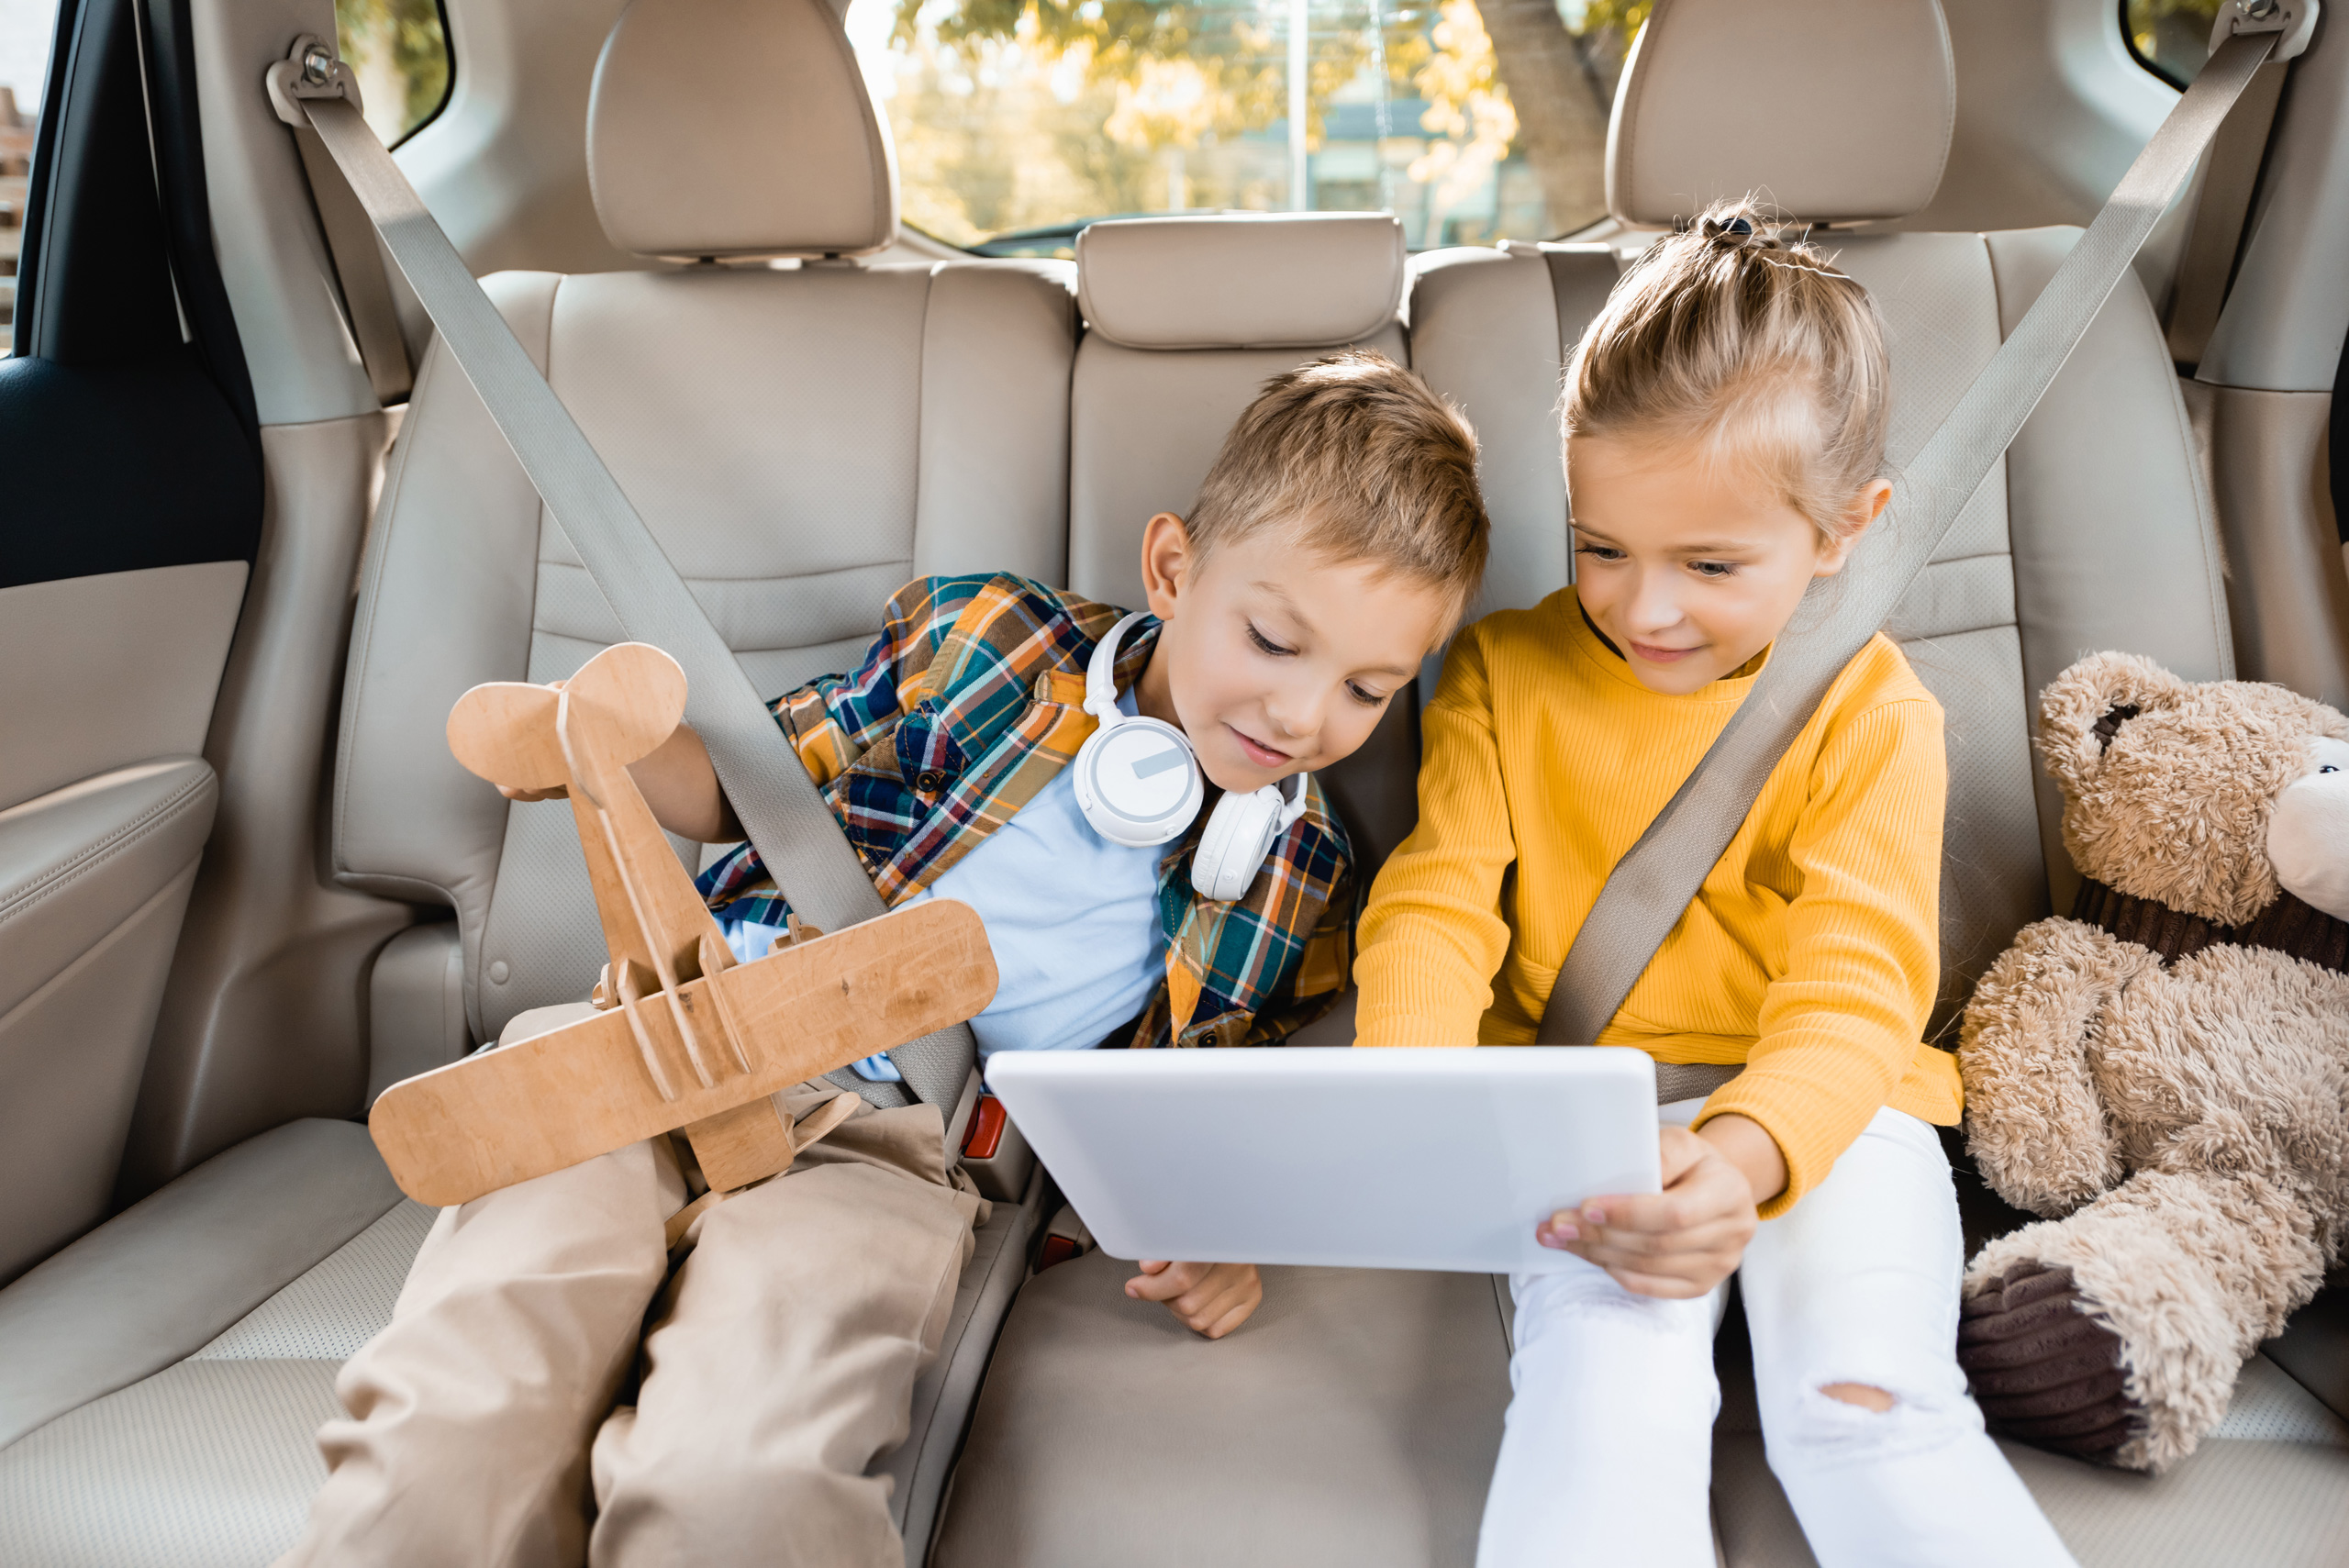 kids watching TV on a mobile device, riding in a car